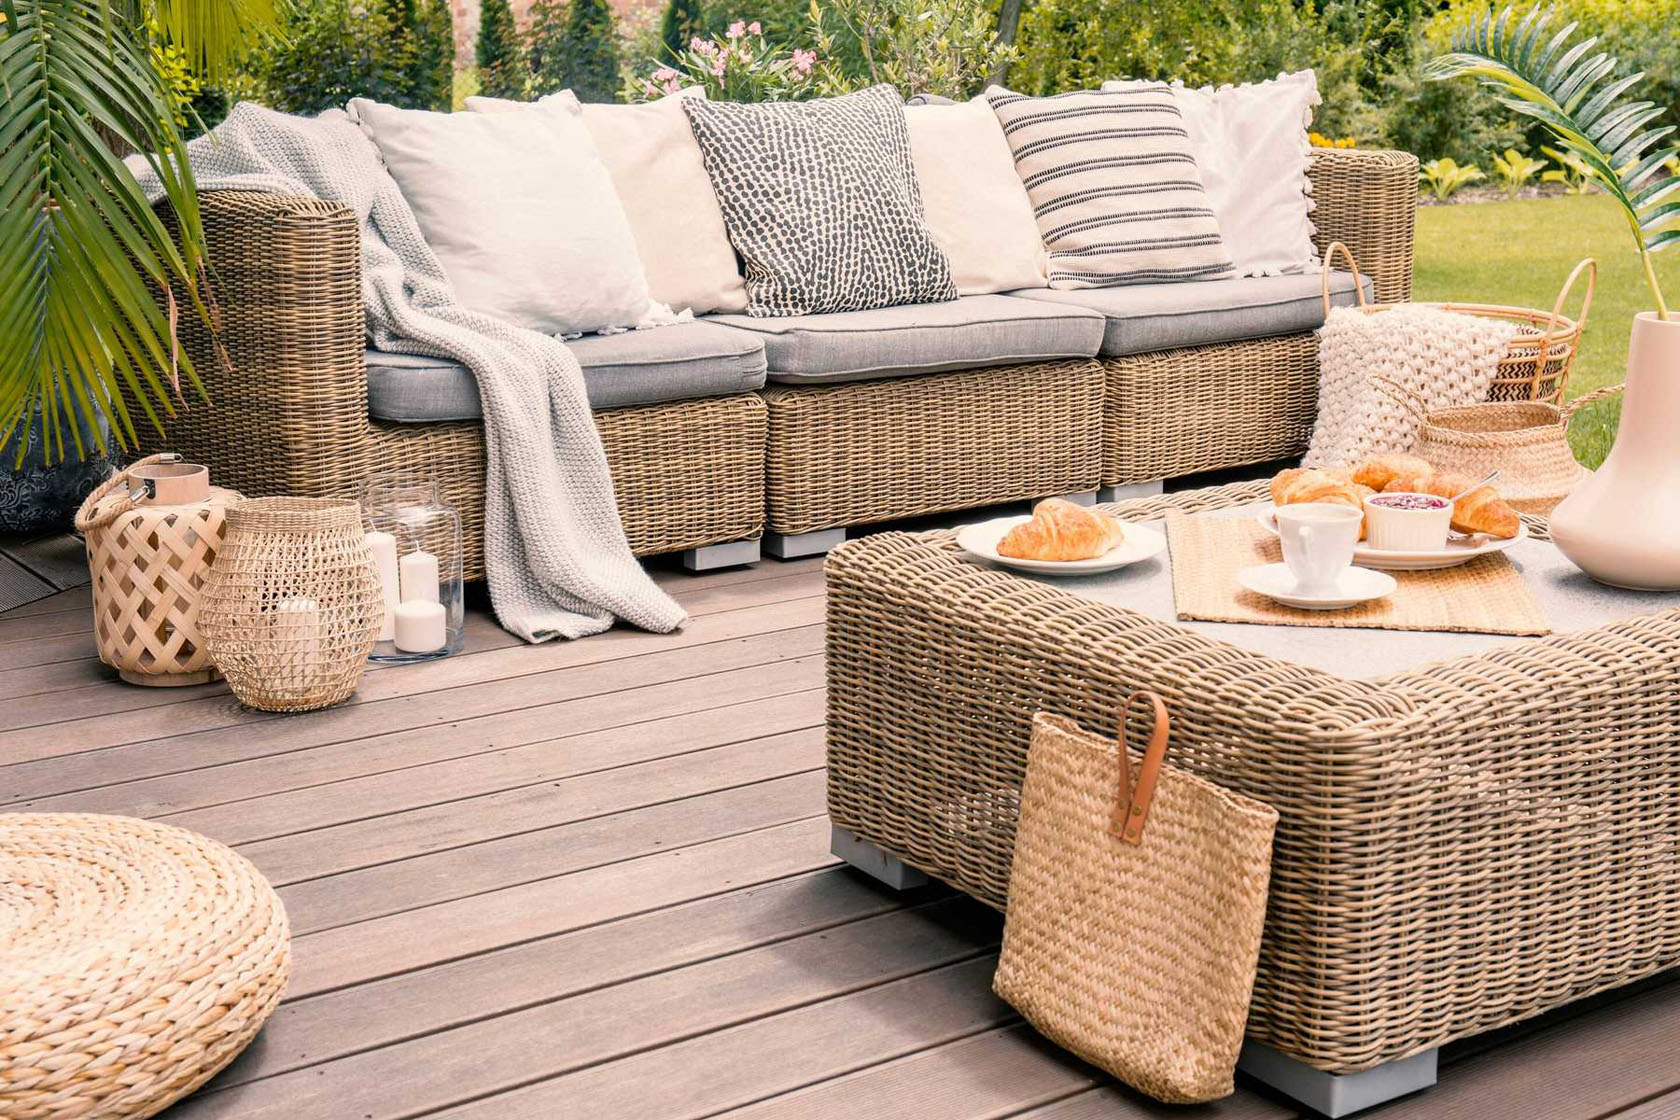 Wicker Furniture Cleaning Tips